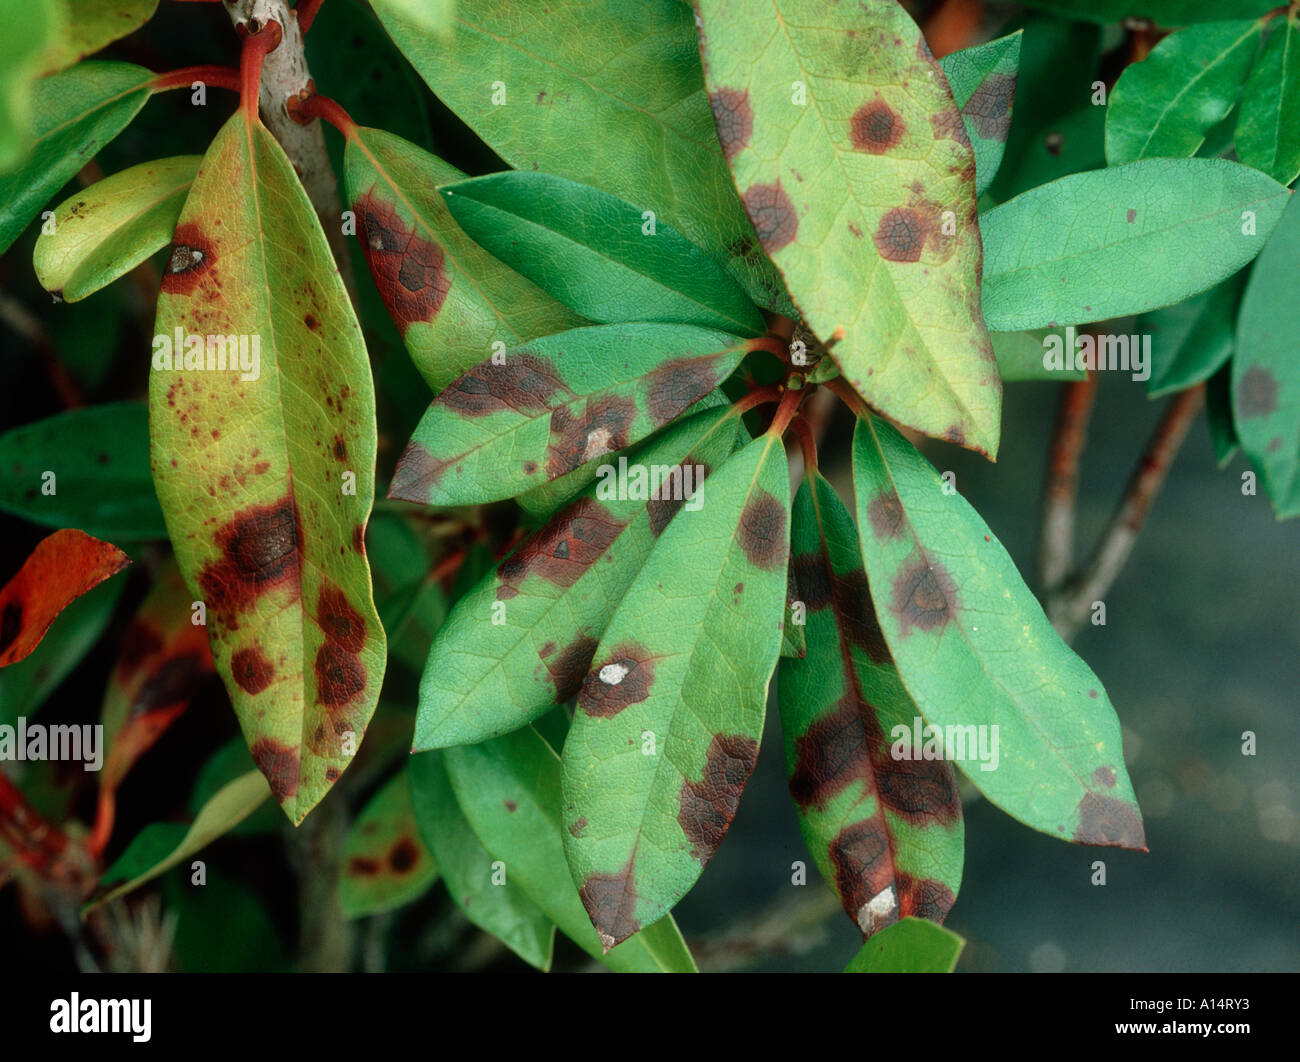 Leaf spot Septoria rhododendri on a Rhododendron leaves Stock Photo